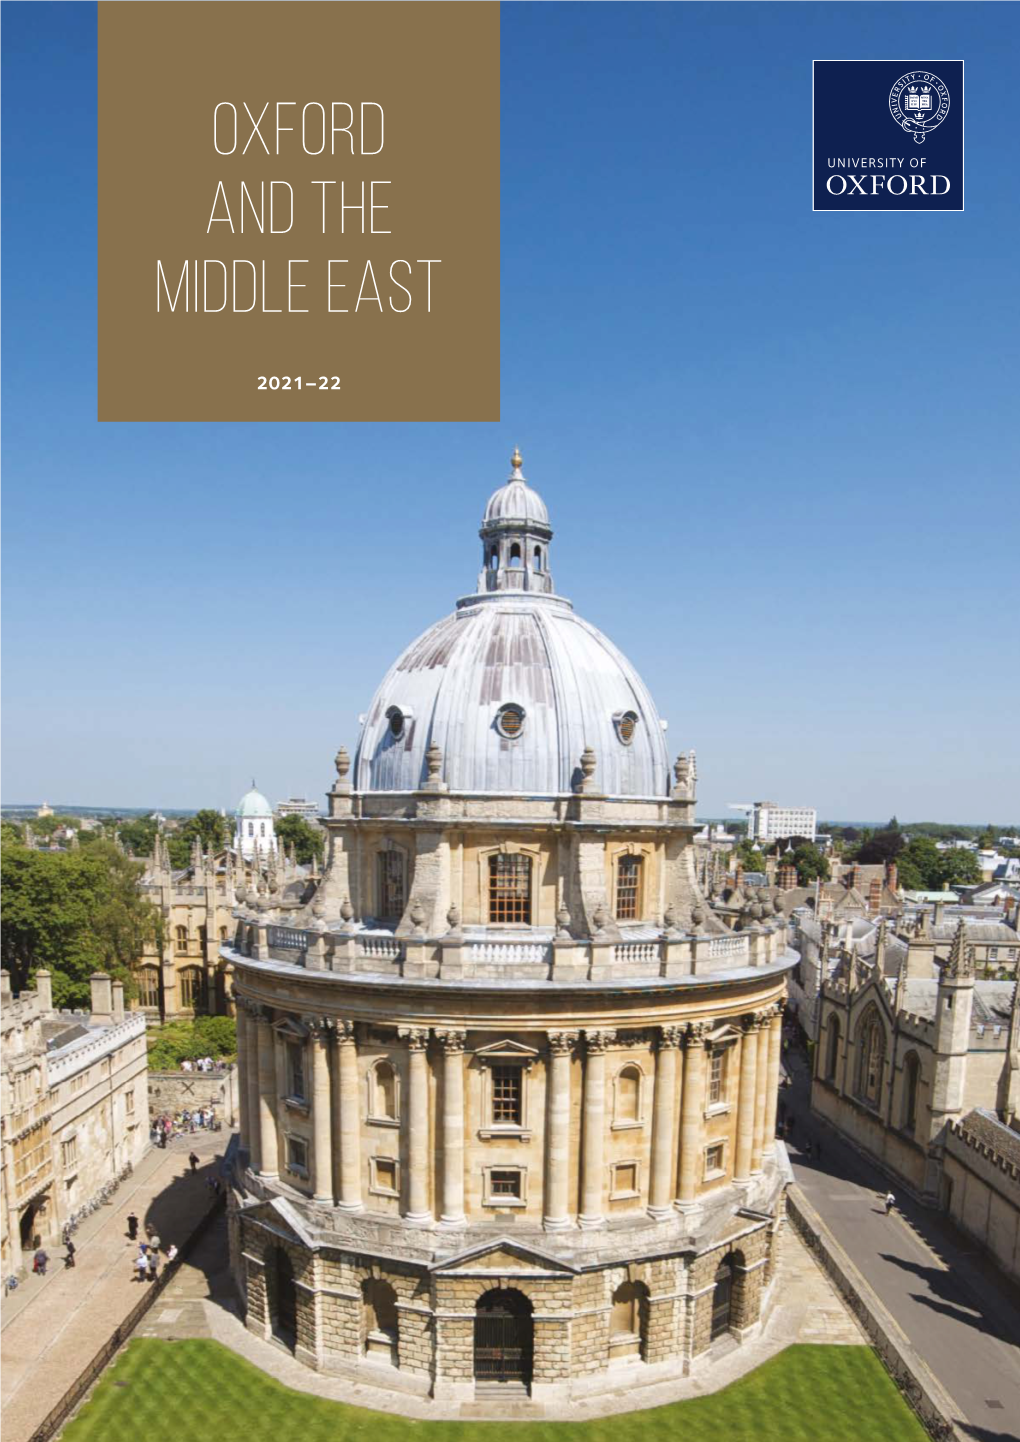 Oxford and the Middle East 2021-22